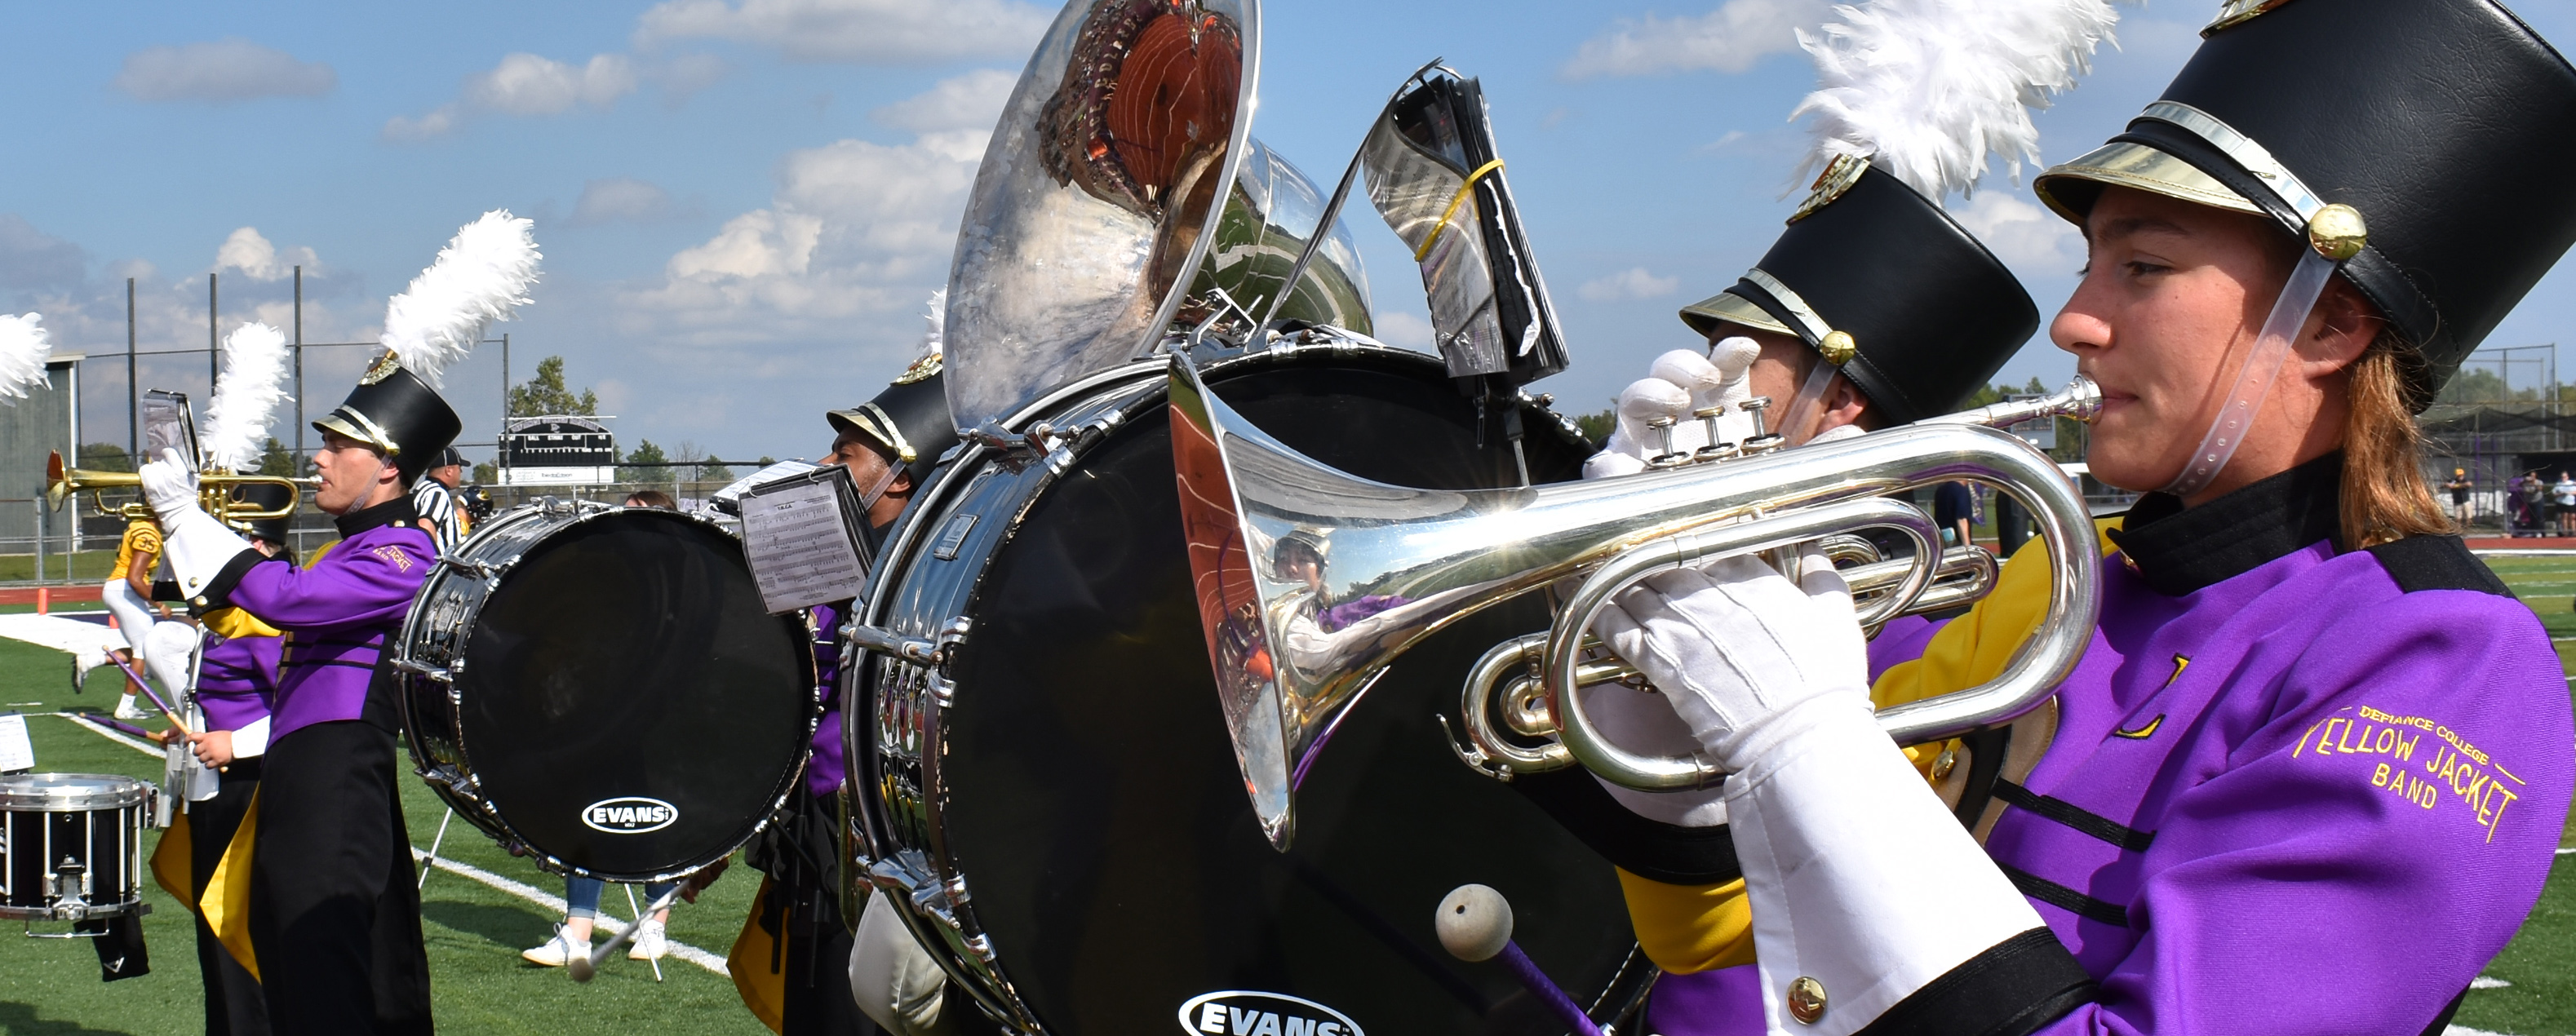 Four members of the Yellow Jacket Band playing their instruments on the football field in full uniforms of bright purple and gold.